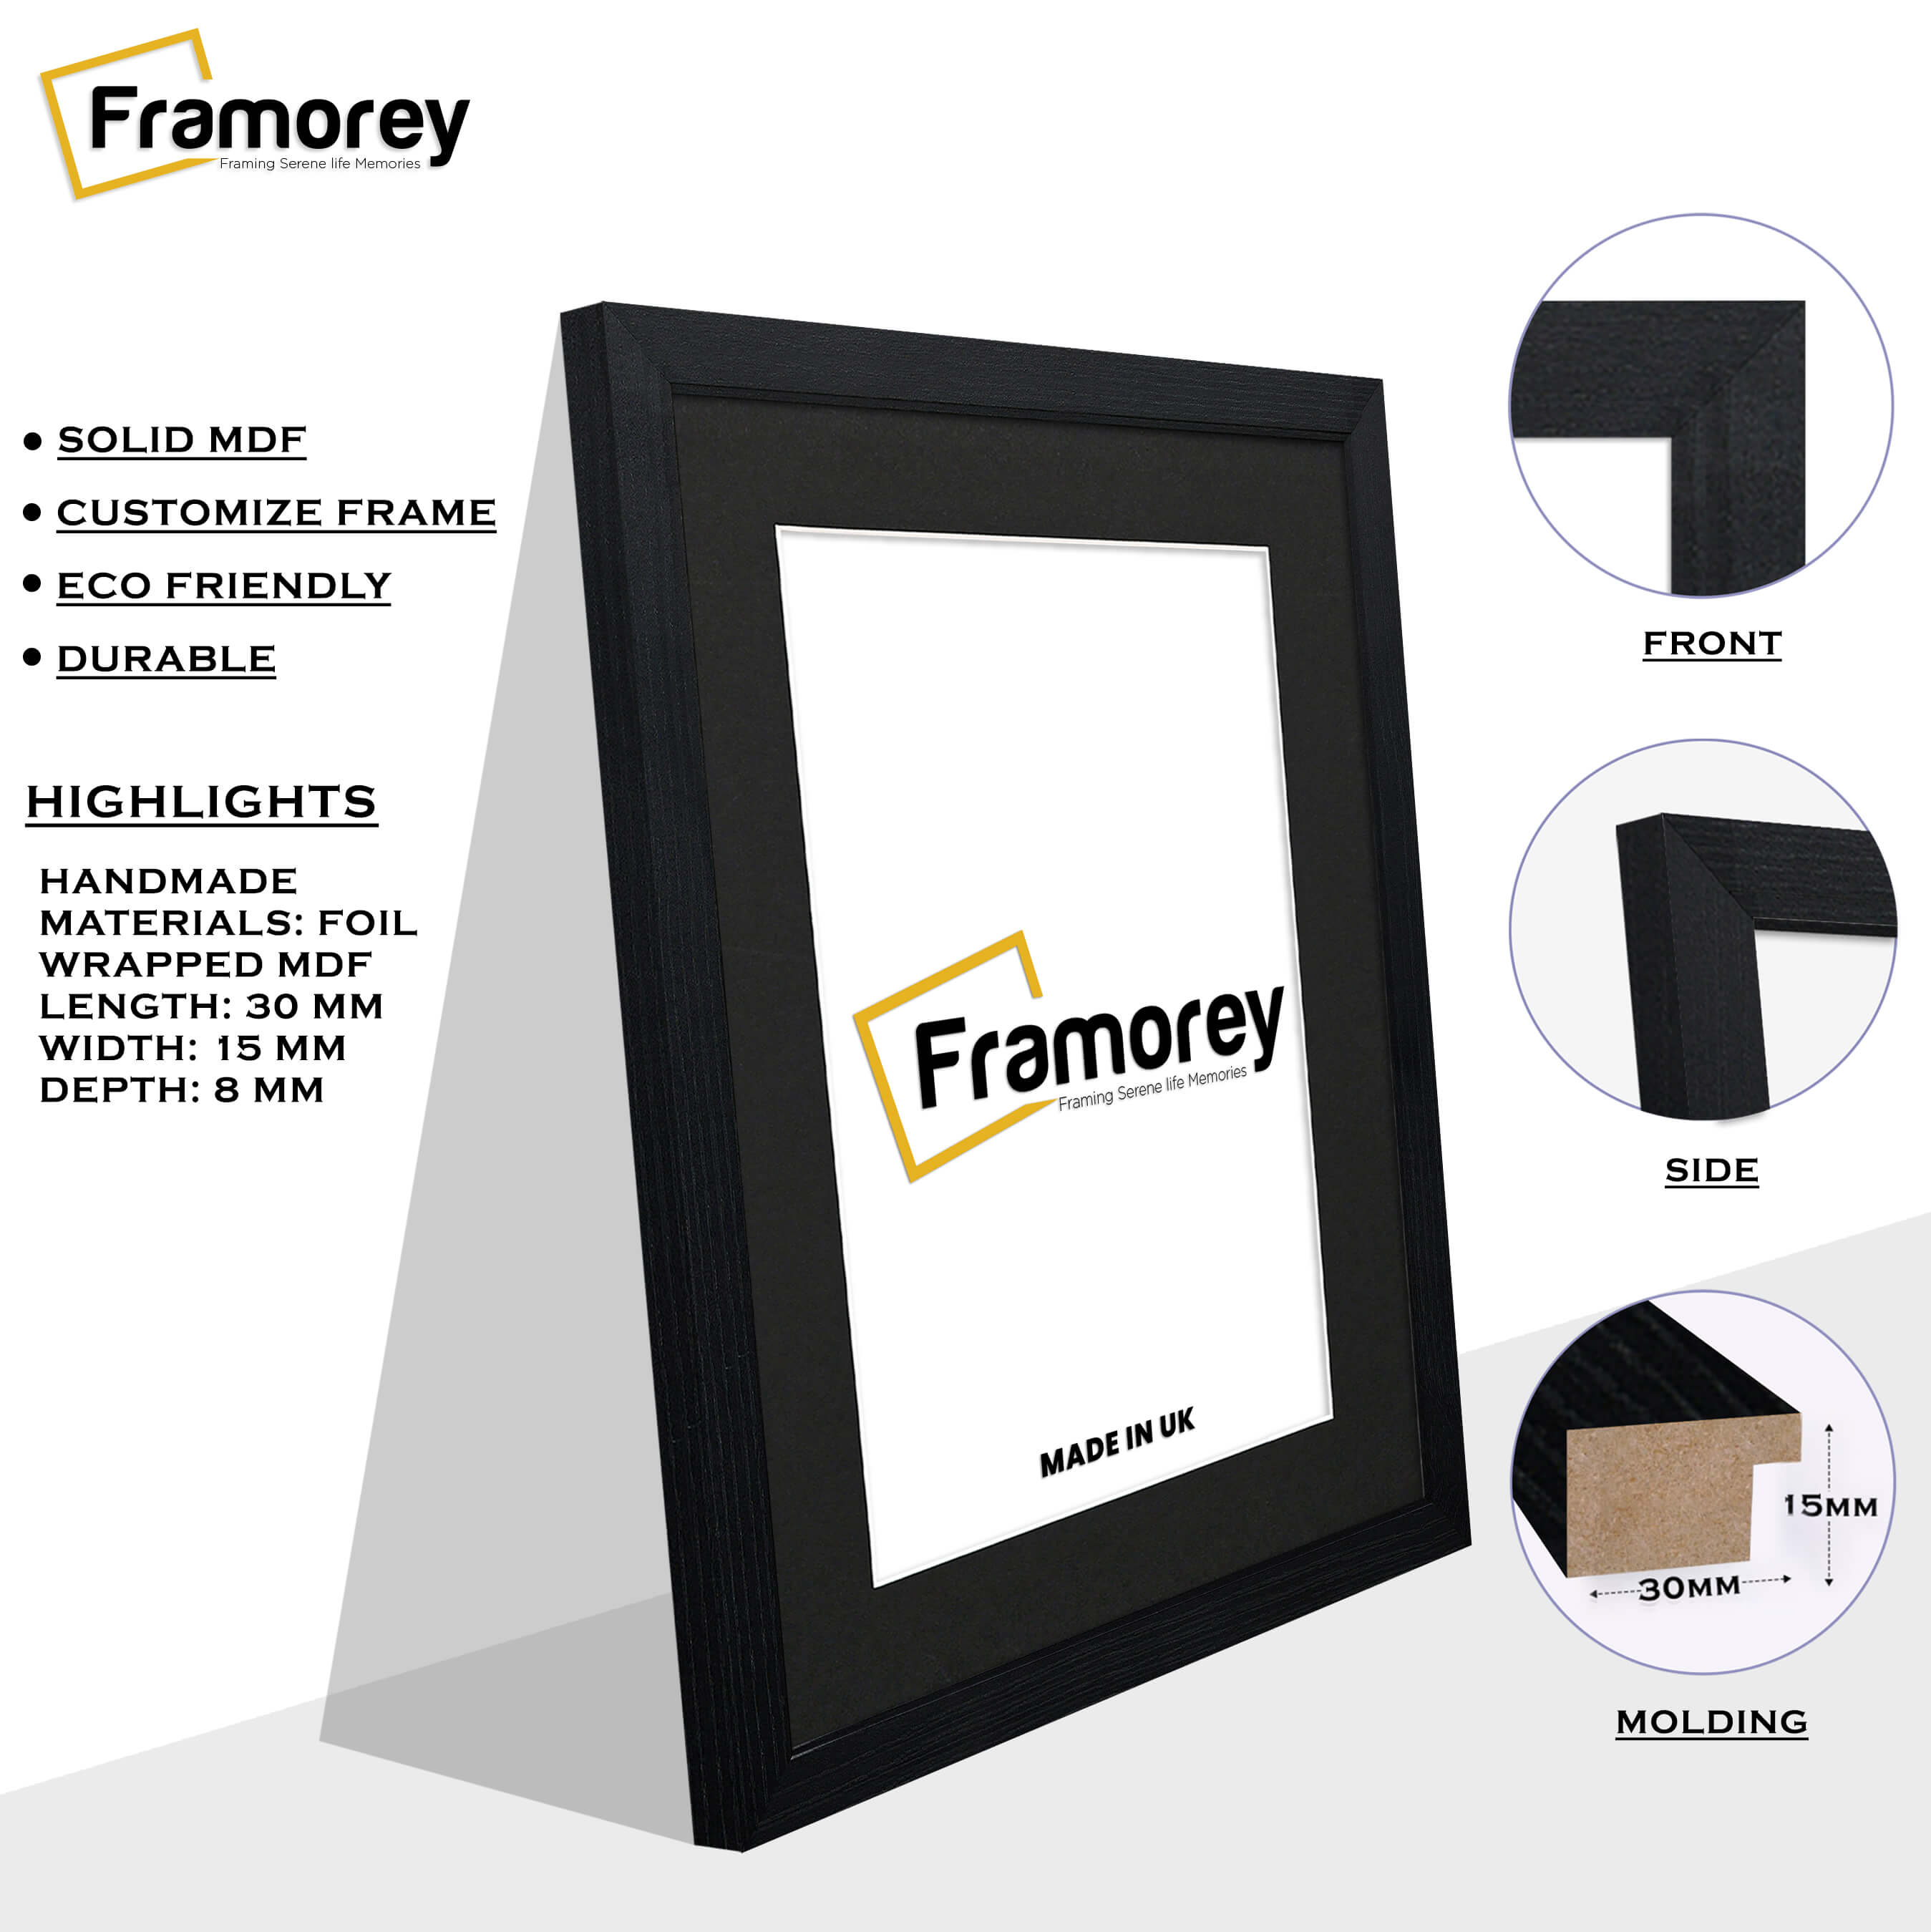 Ash Black Picture Frame With Black Mount